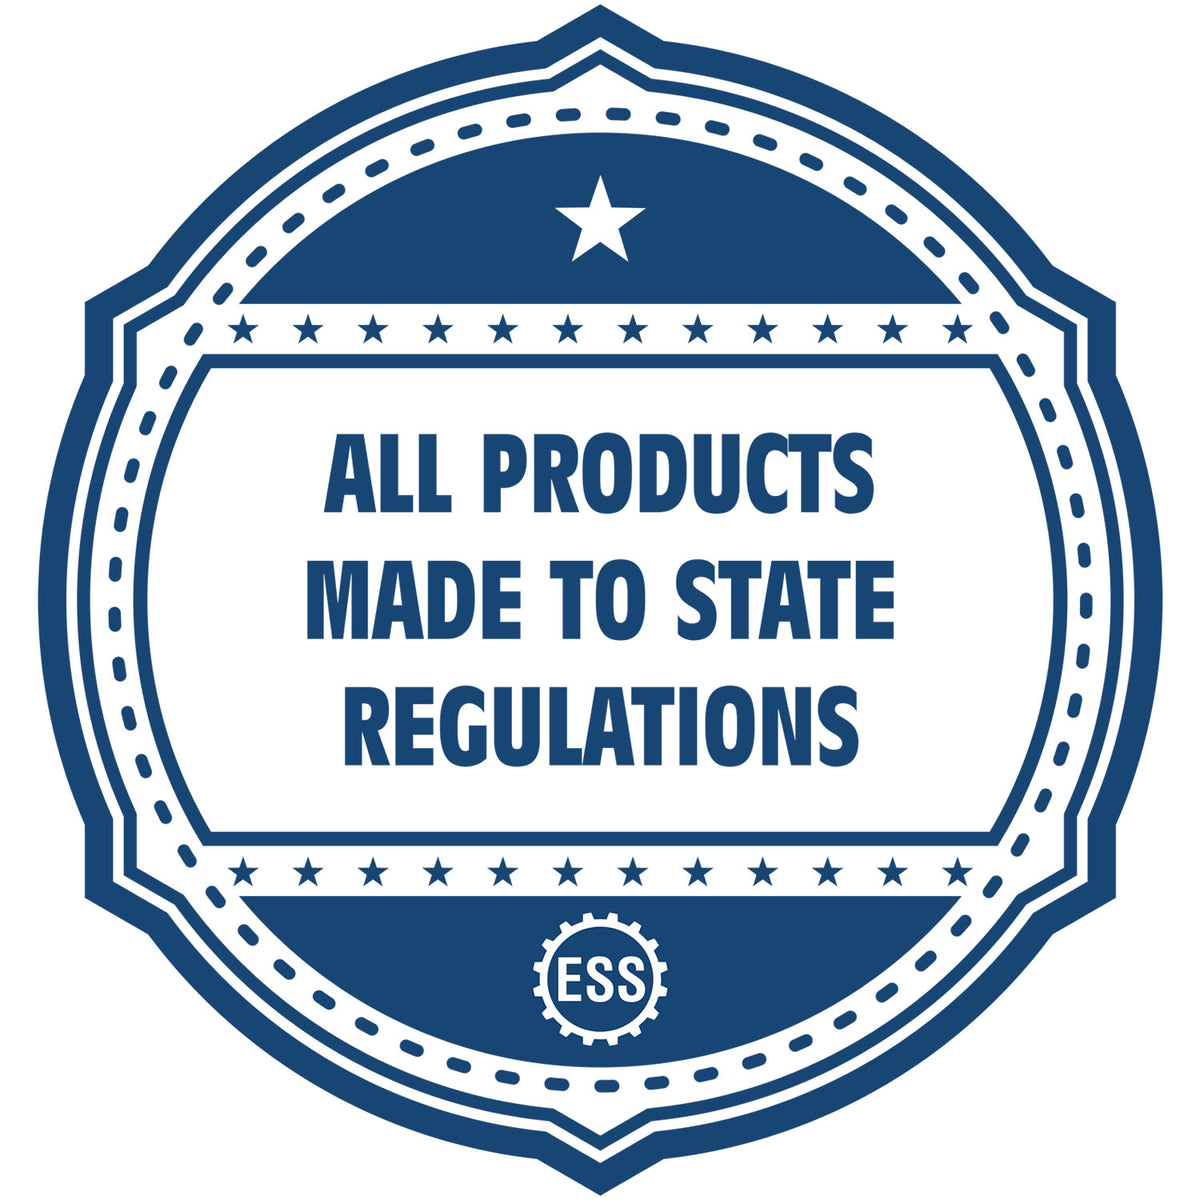 An icon or badge element for the State of Texas Architectural Seal Embosser showing that this product is made in compliance with state regulations.